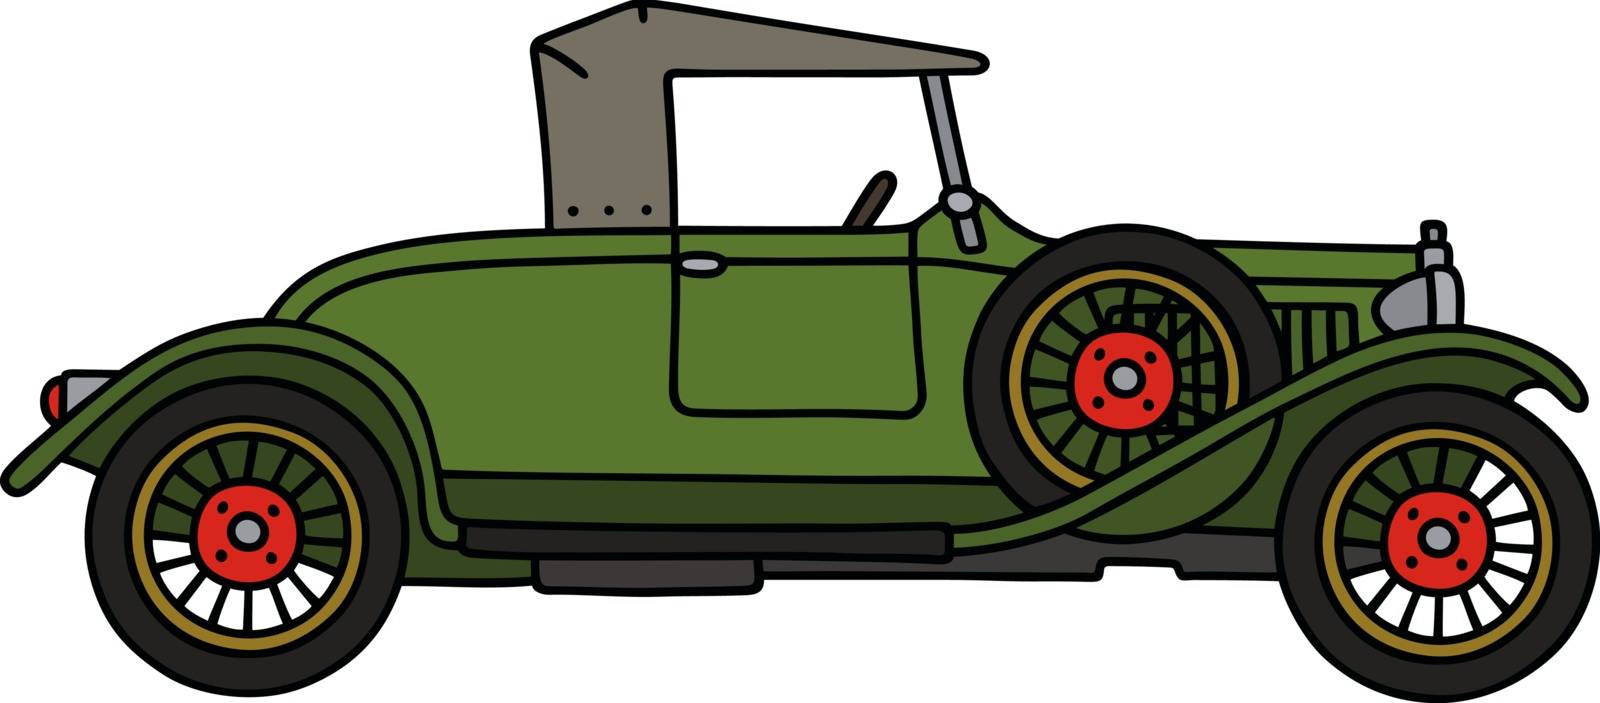 The vectorized hand drawing of a vintage green convertible